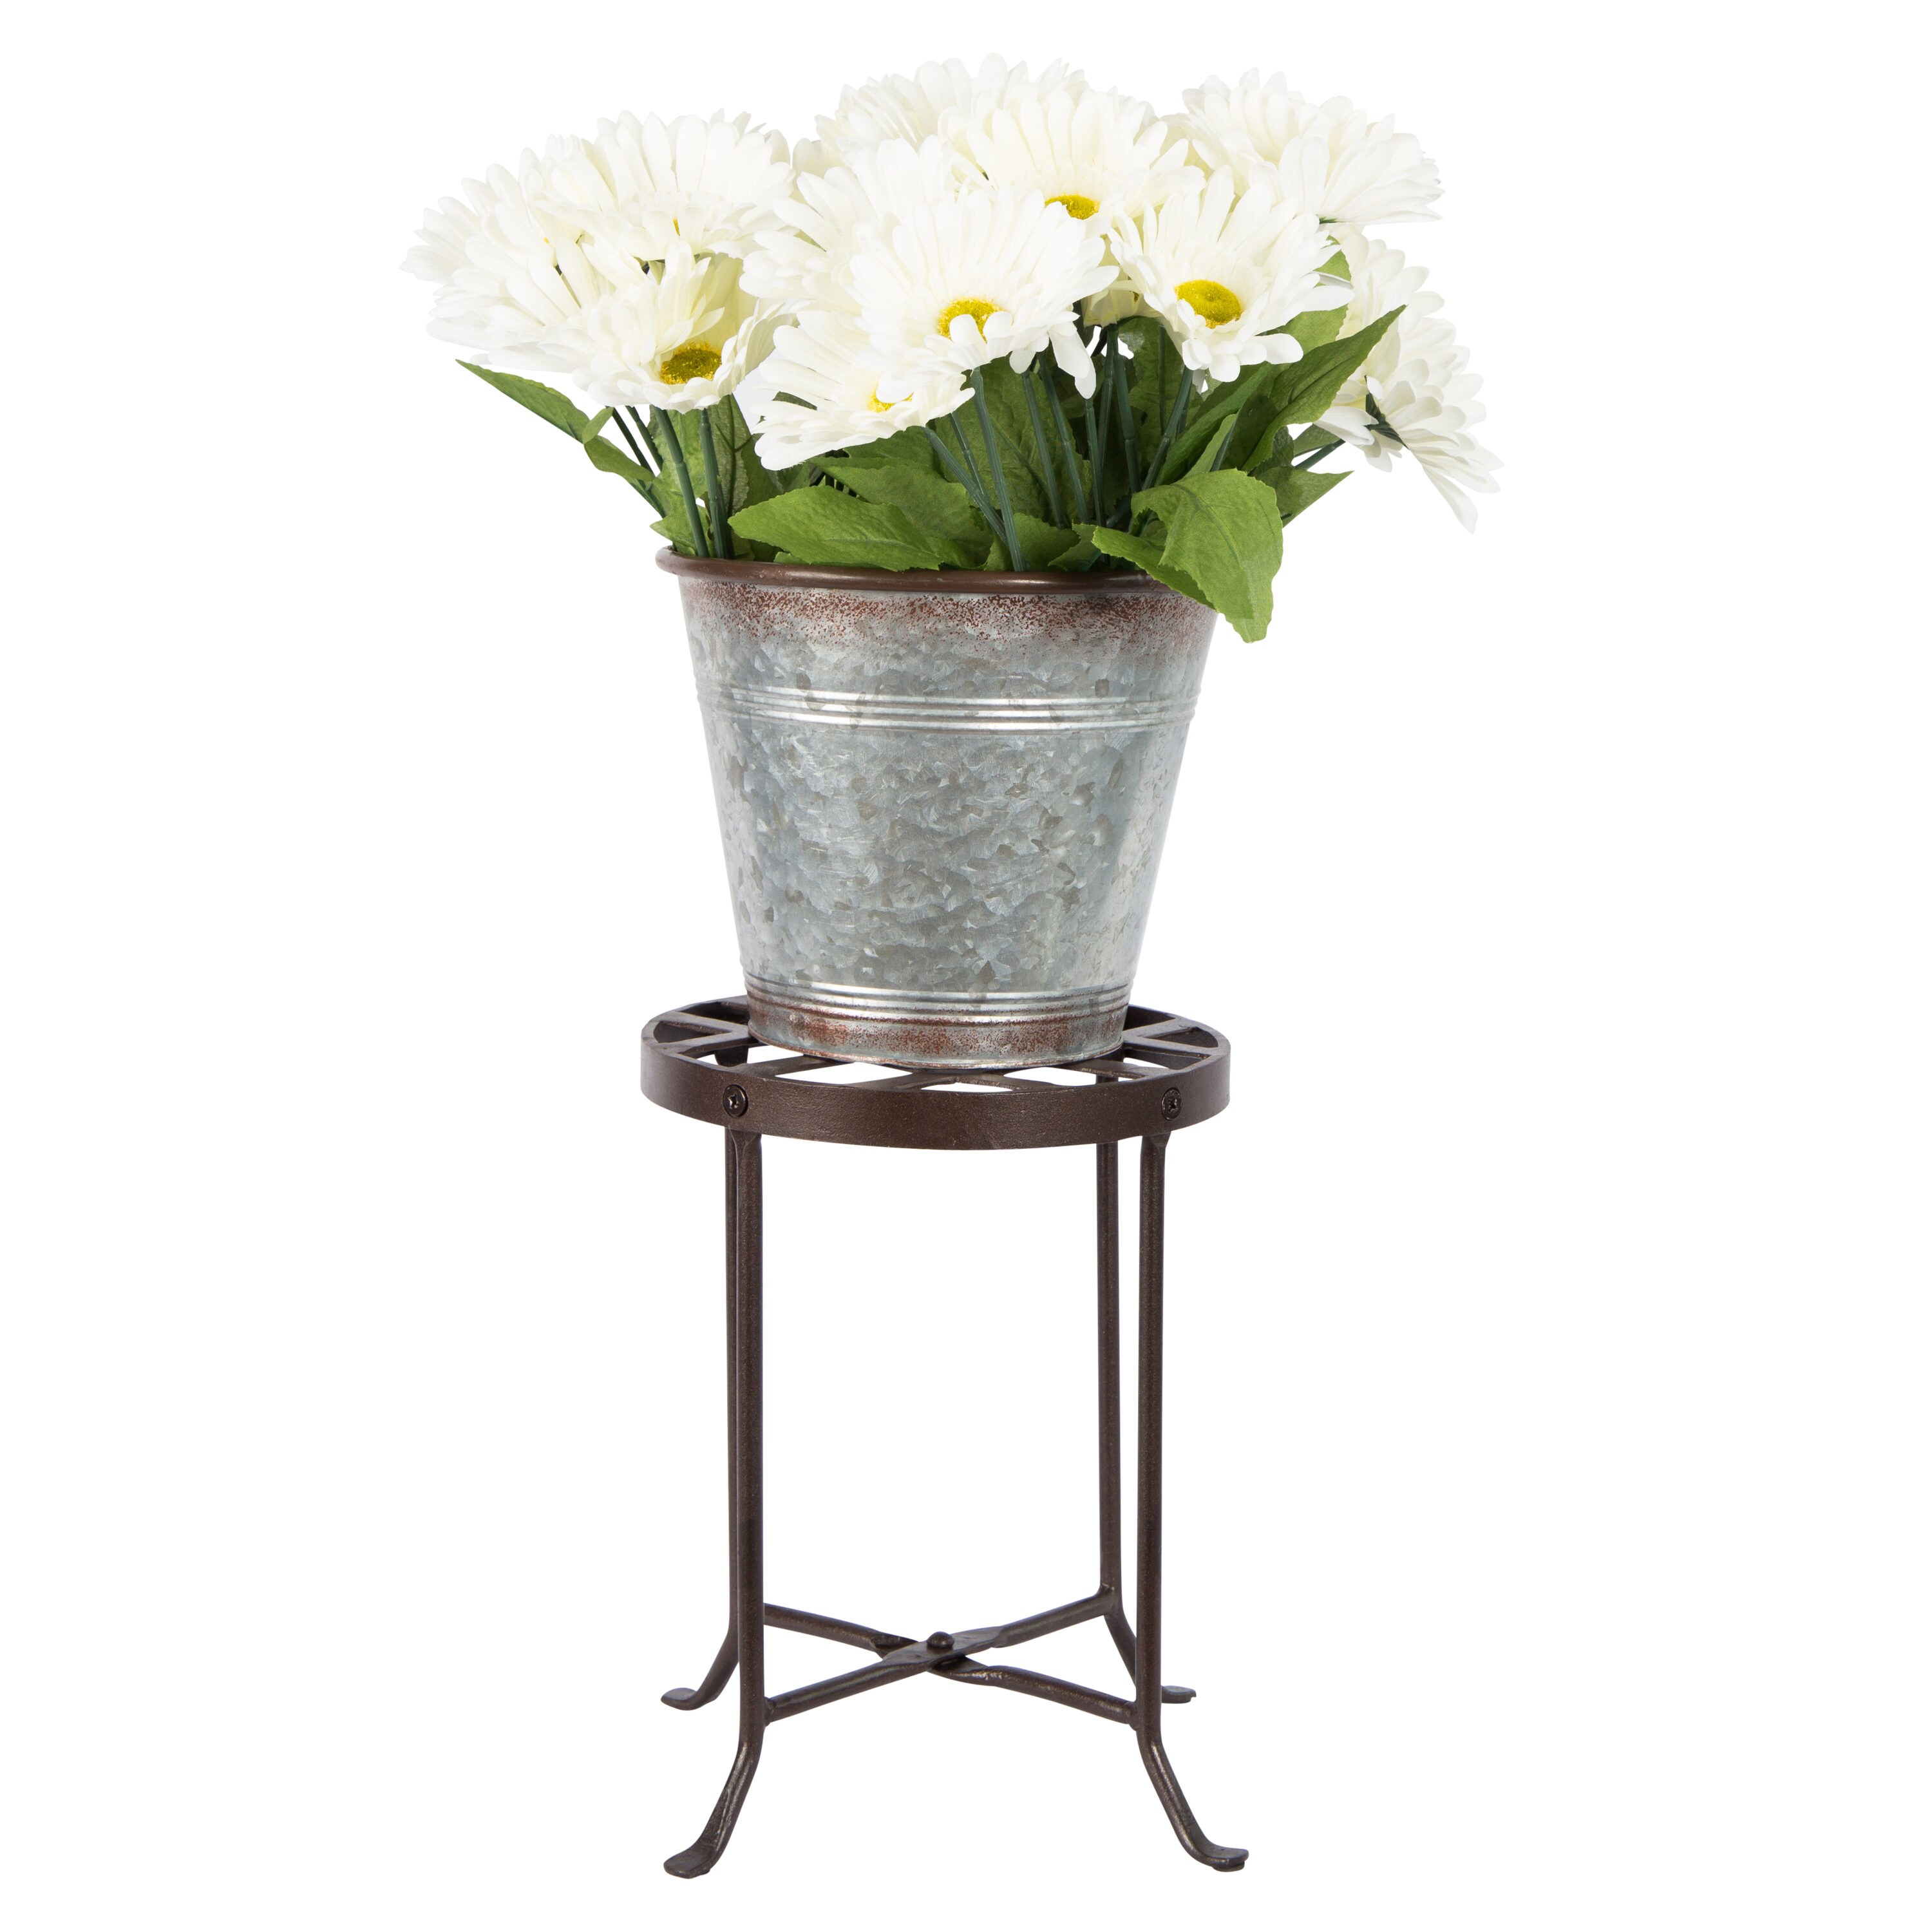 Achla Designs FB-21 Flowers Plant Stand 